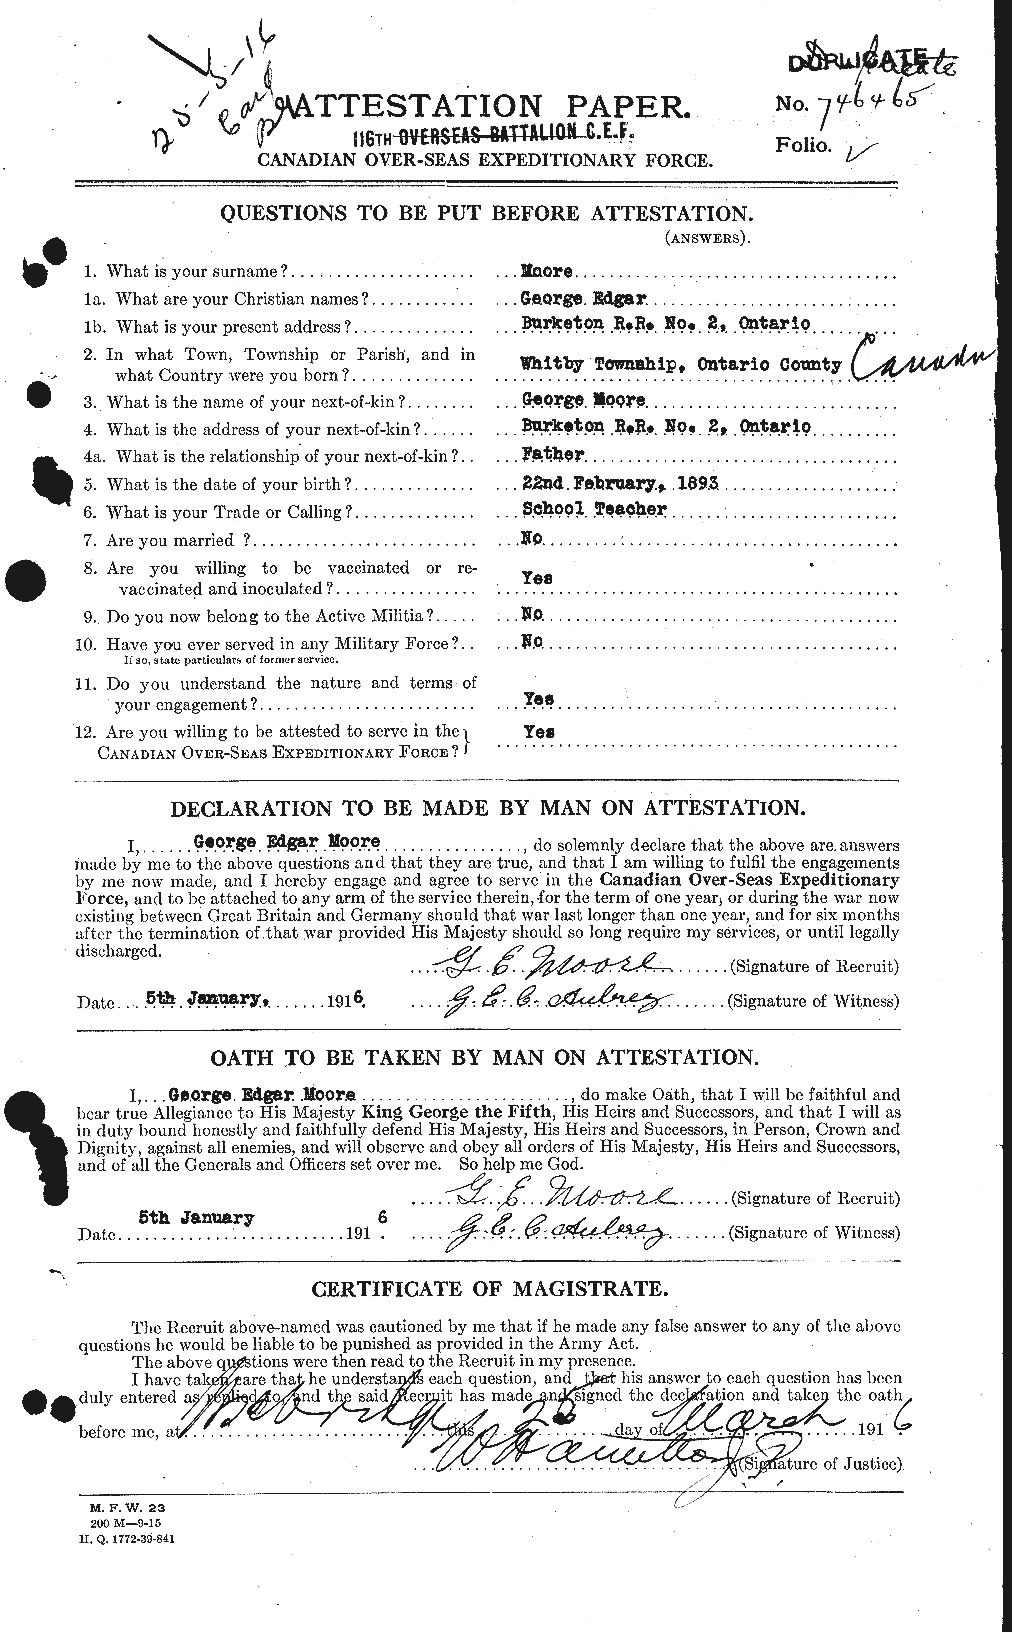 Personnel Records of the First World War - CEF 501995a